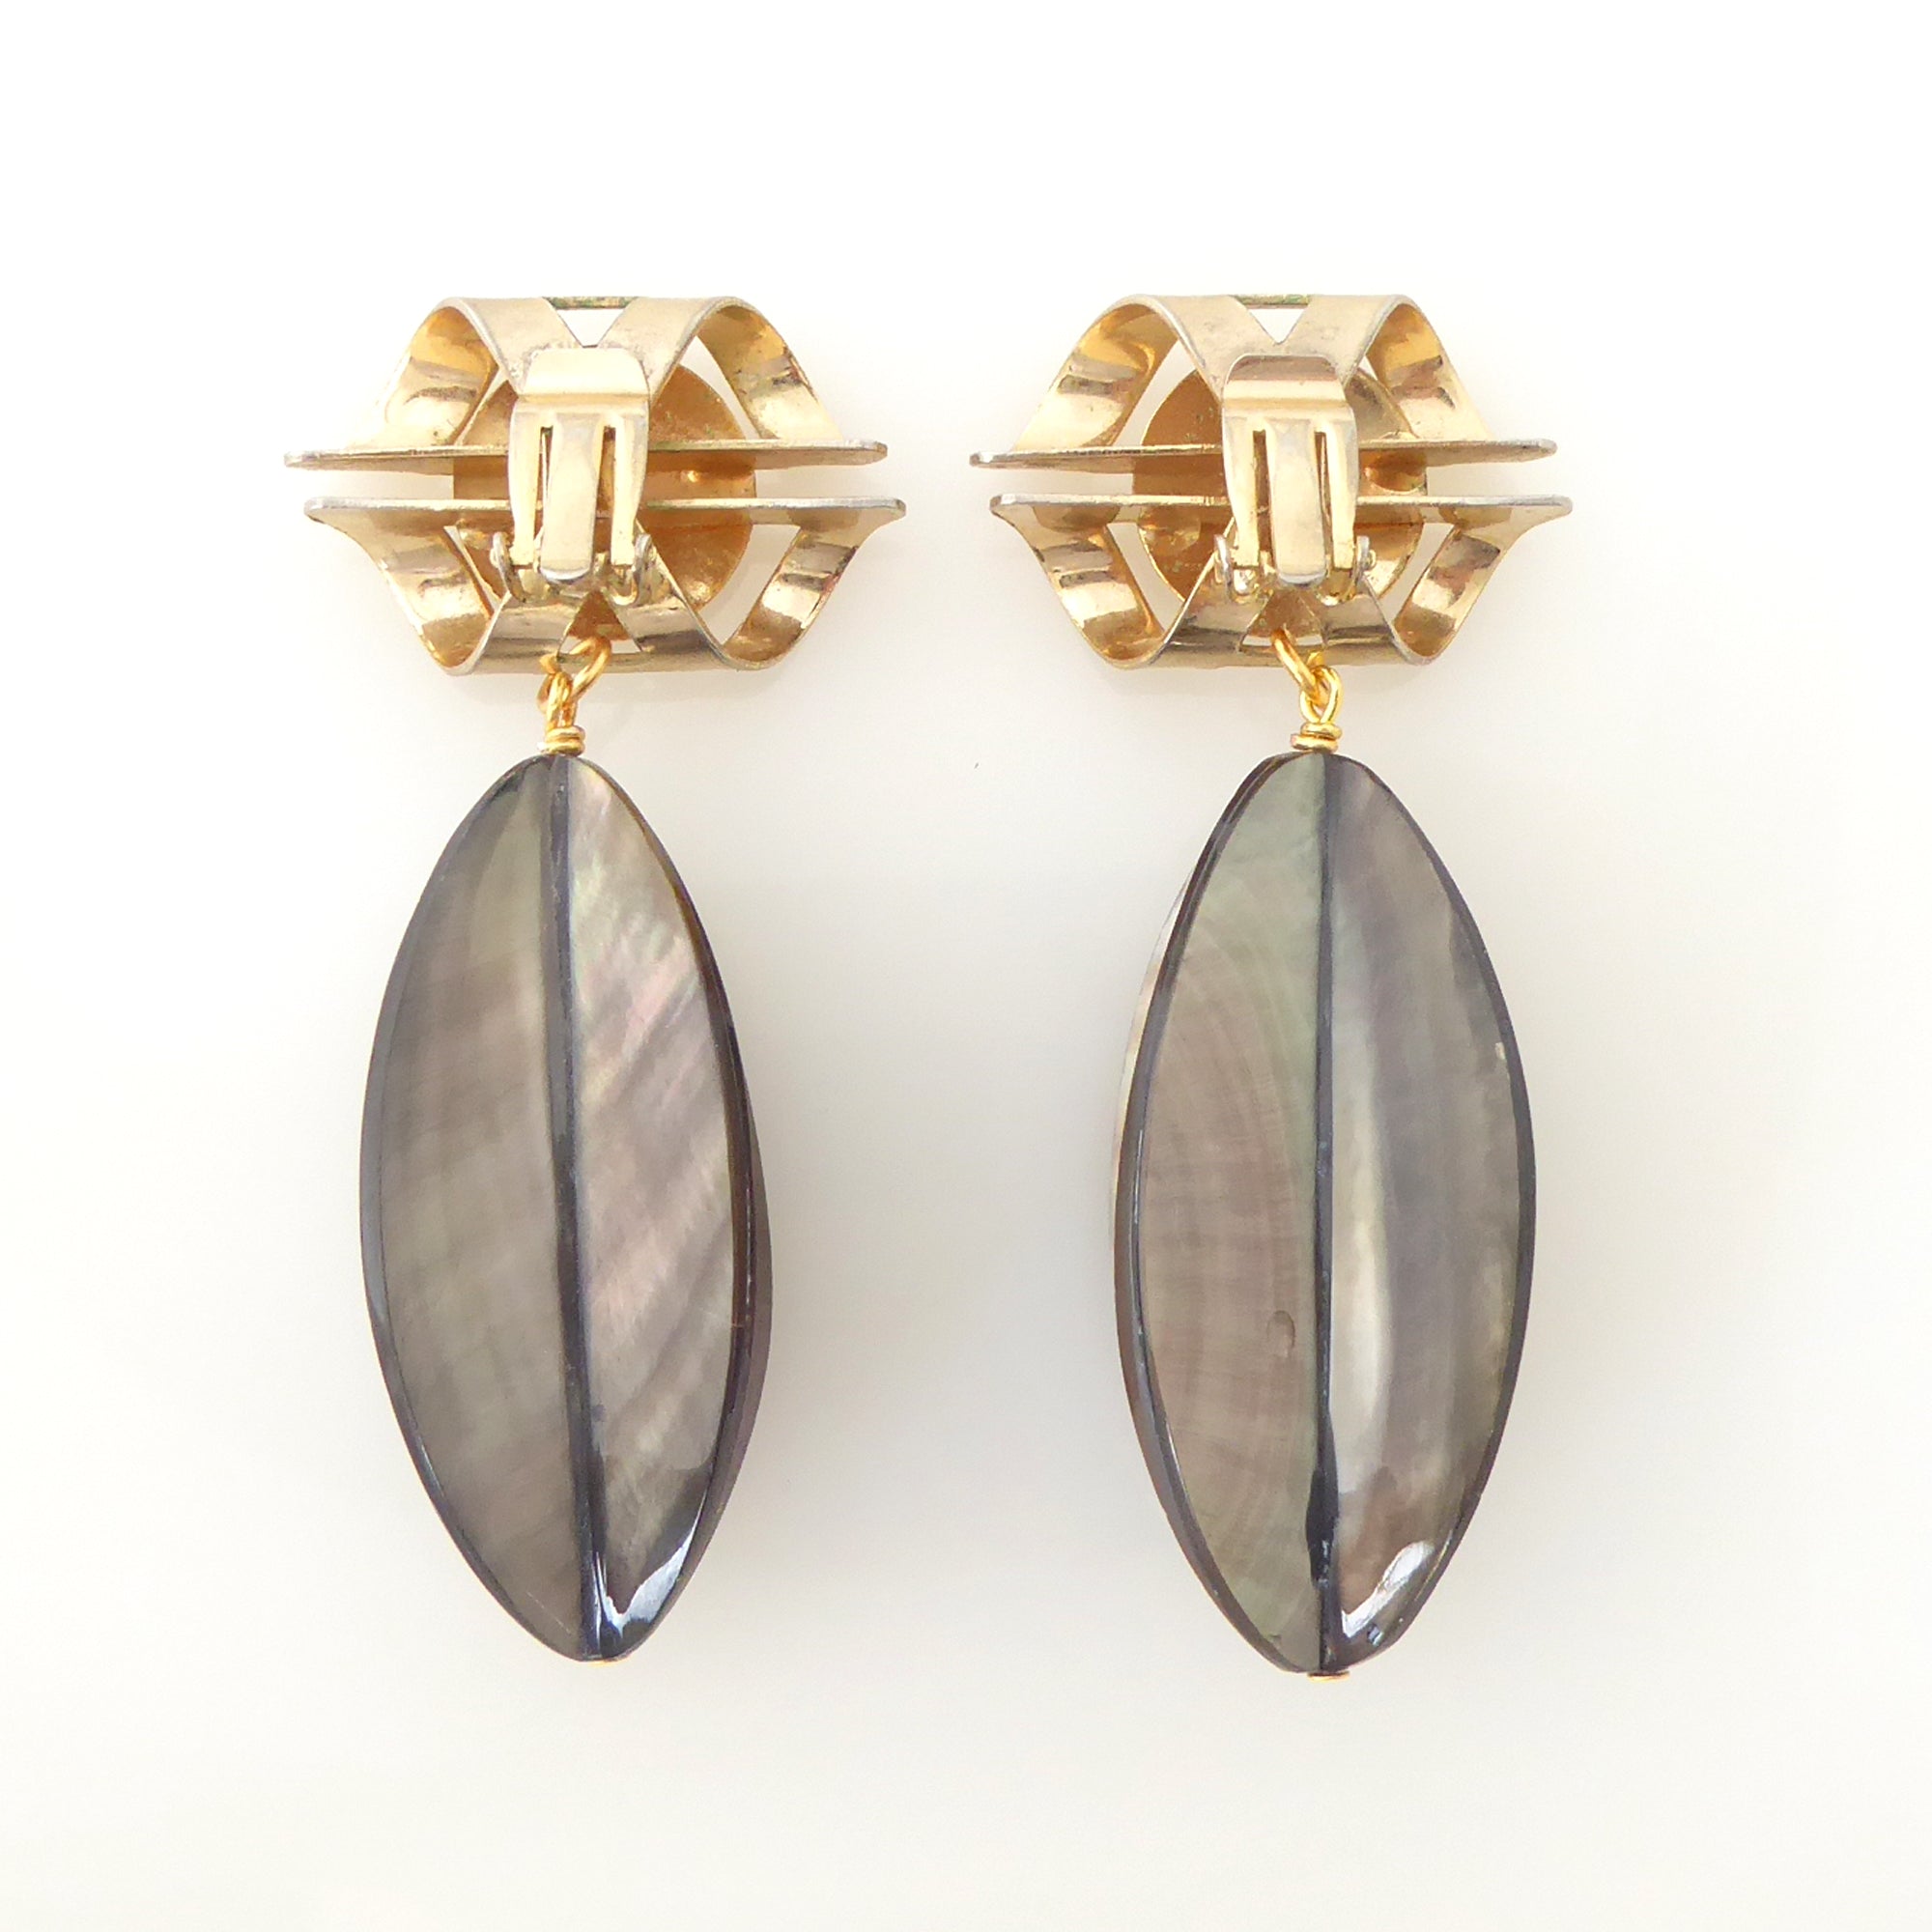  Black lip oyster shell earrings by Jenny Dayco 4